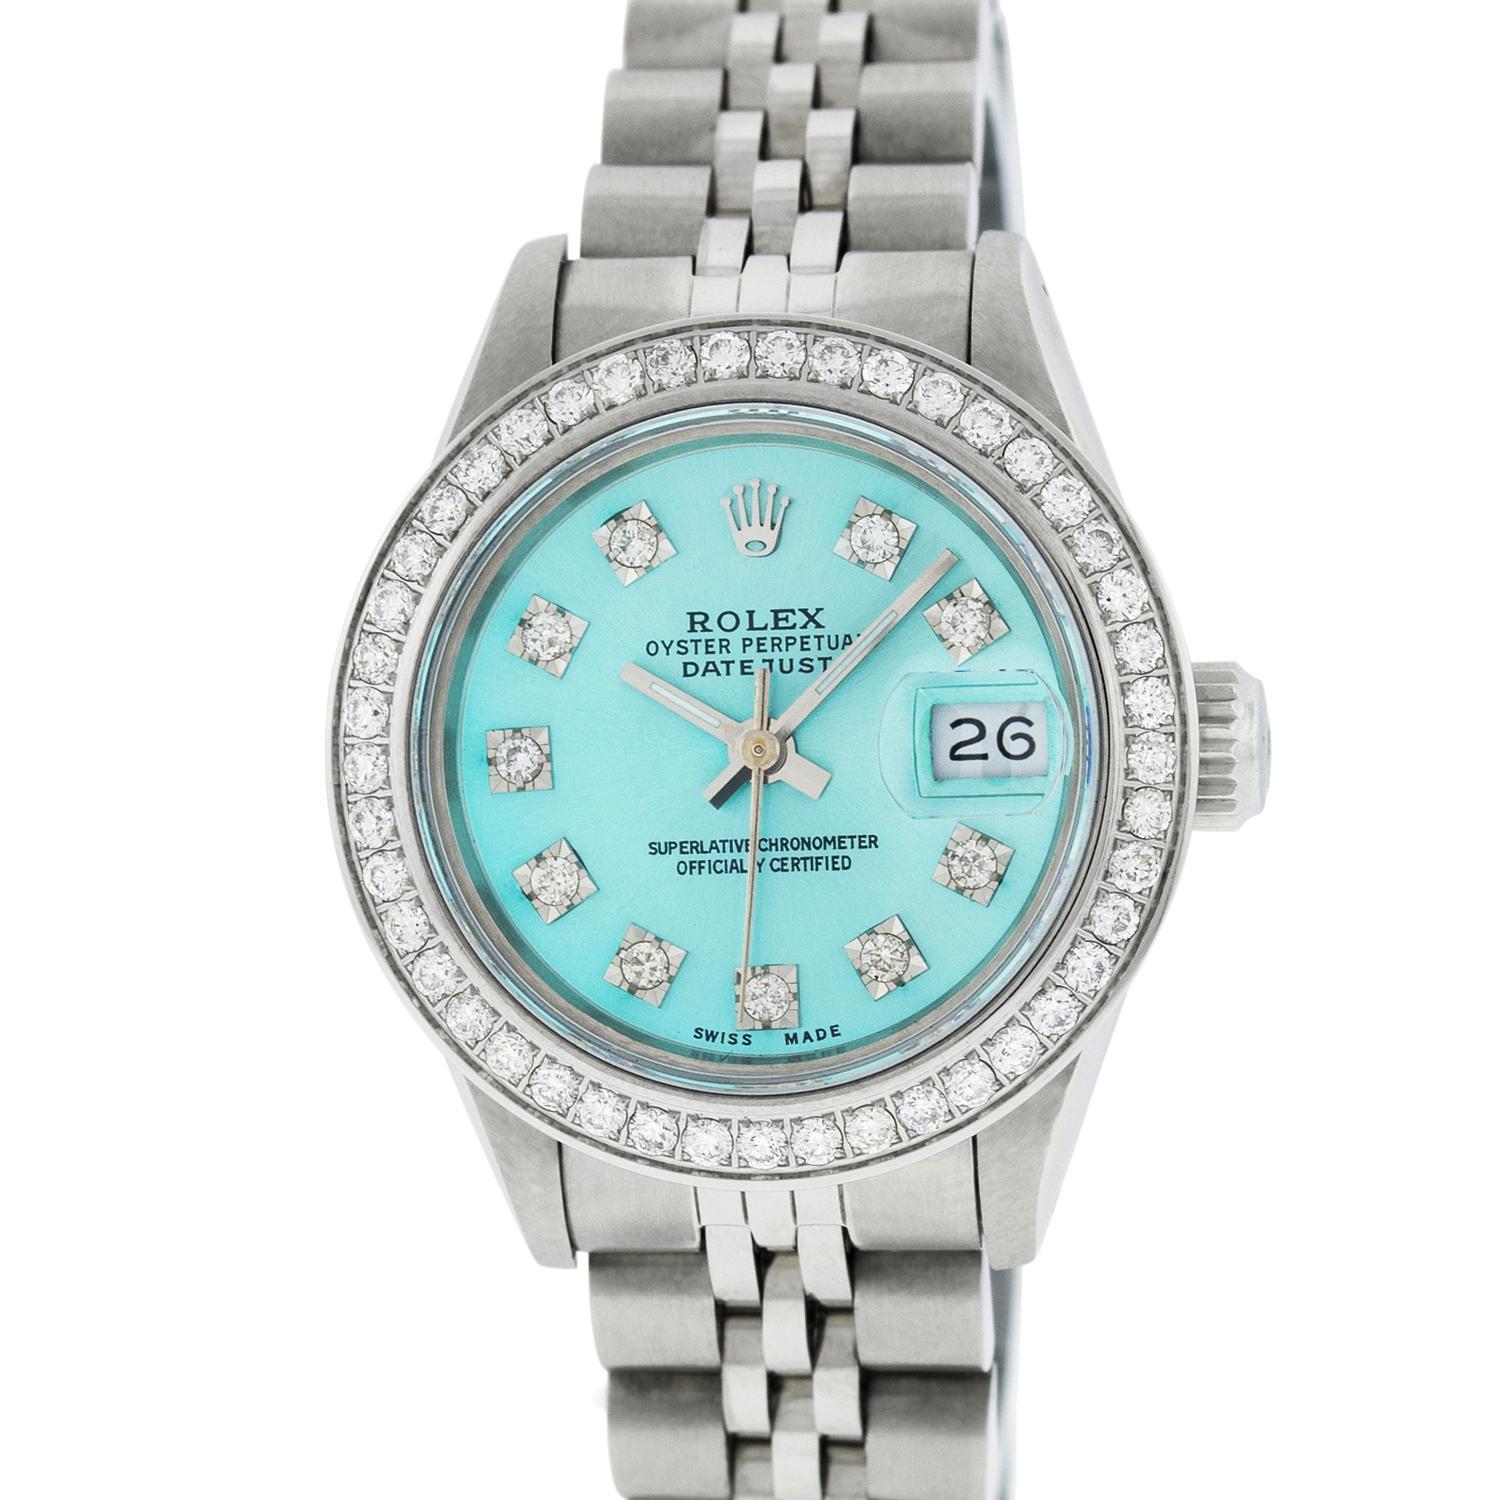 WATCH DESCRIPTION
 
BRAND : Rolex
MODEL : Datejust
CASE SIZE : 26mm
CASE : Rolex Stainless Steel Case
GENDER : Women's

WATCH FEATURES
 
DIAL : Rolex Professionally Refinished Ice Blue Dial set with aftermarket Genuine Round (VVS H Color) Diamond